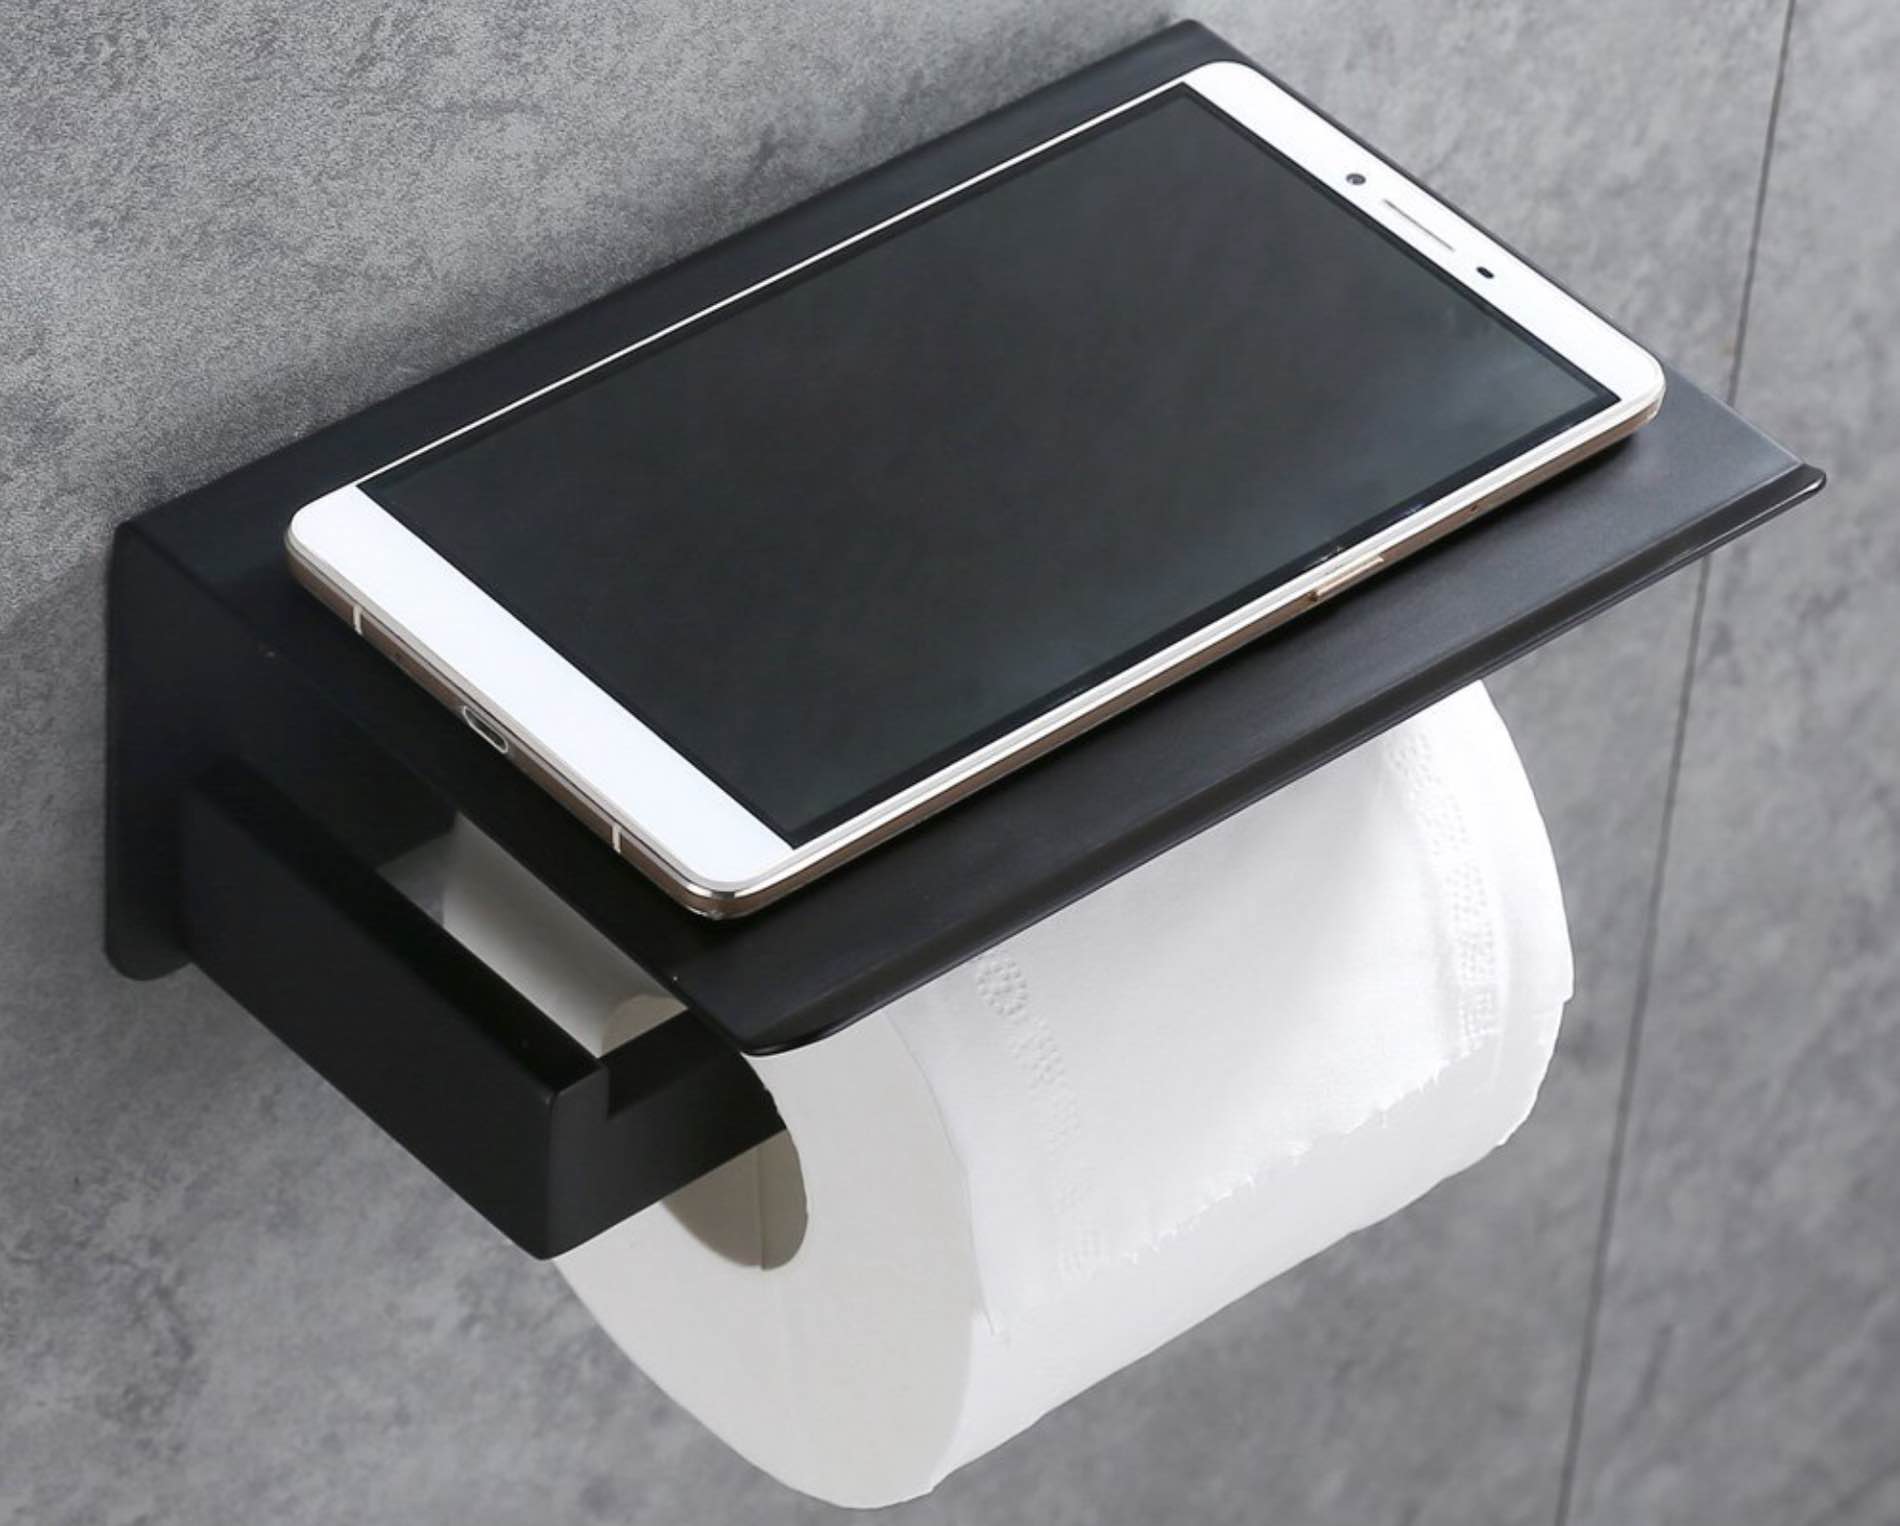 This toilet paper holder lets you set your phone (or whatever else) down while you're conducting your business. ($25–$30, depending on color)